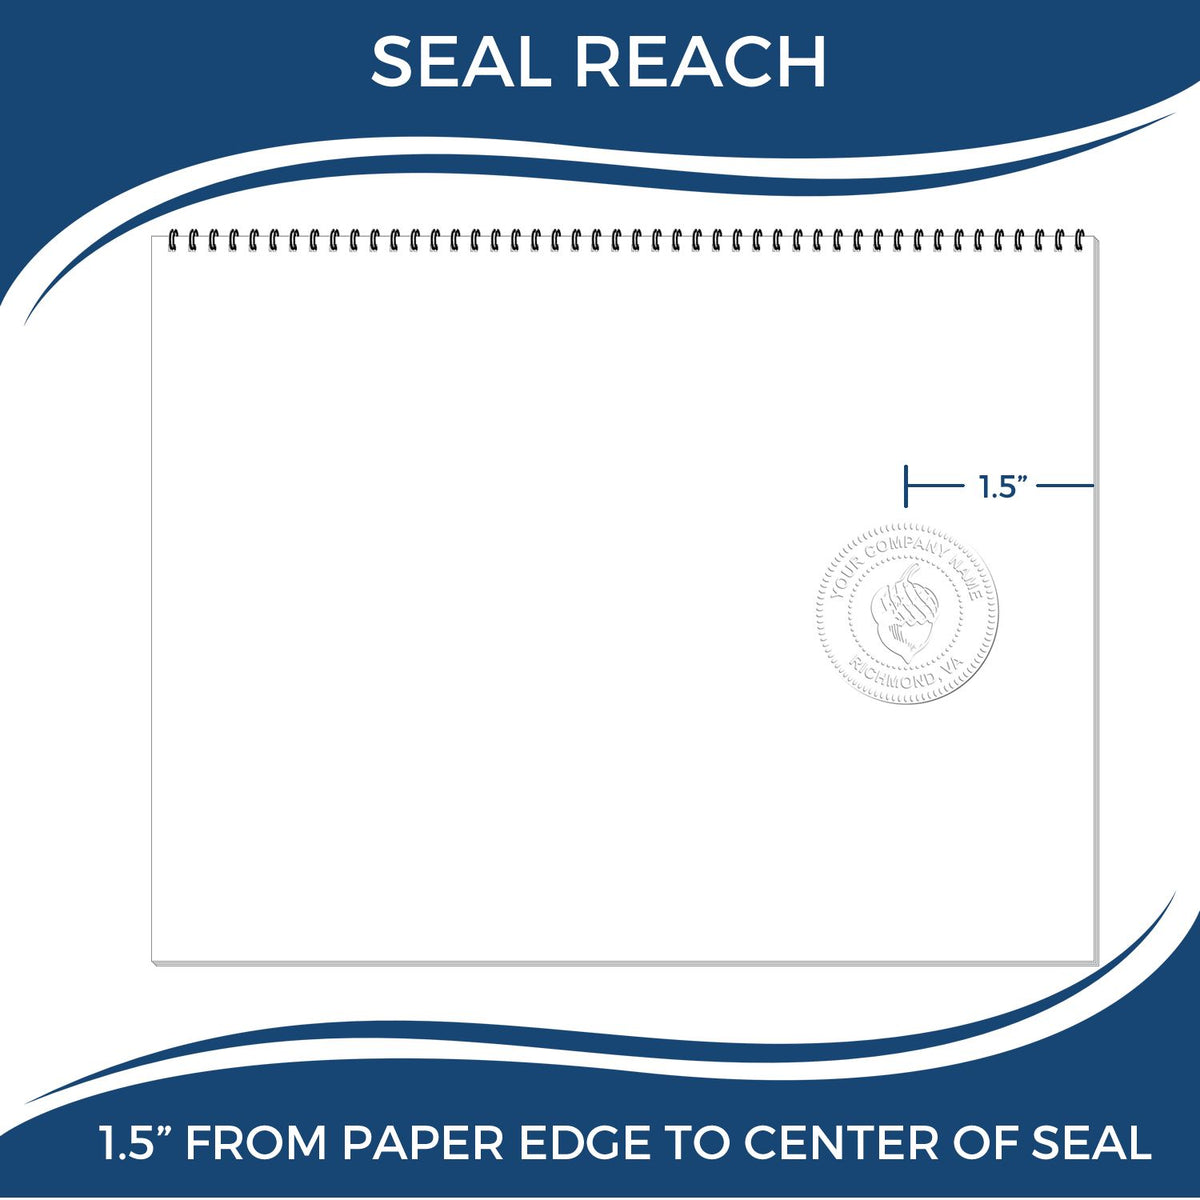 An infographic showing the seal reach which is represented by a ruler and a miniature seal image of the Soft Maine Professional Geologist Seal